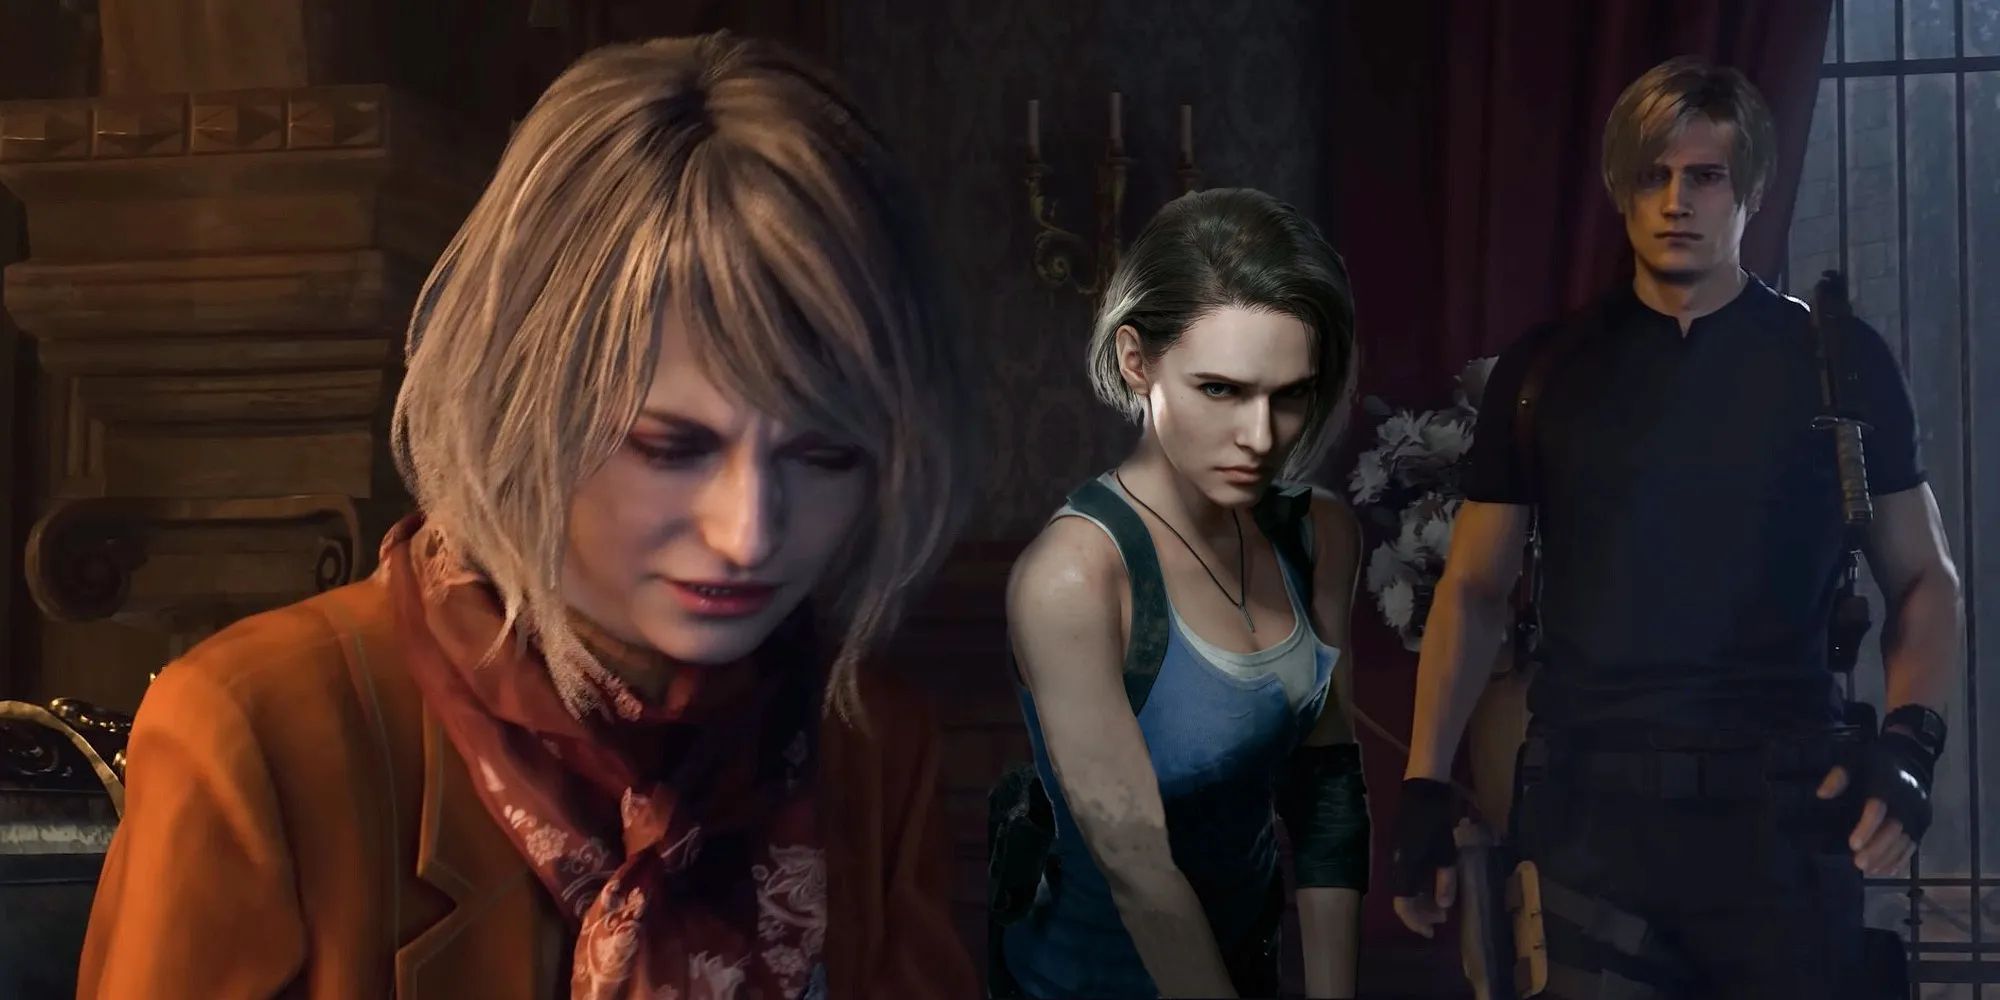 Ashley, Jill, and Leon from Resident Evil 4